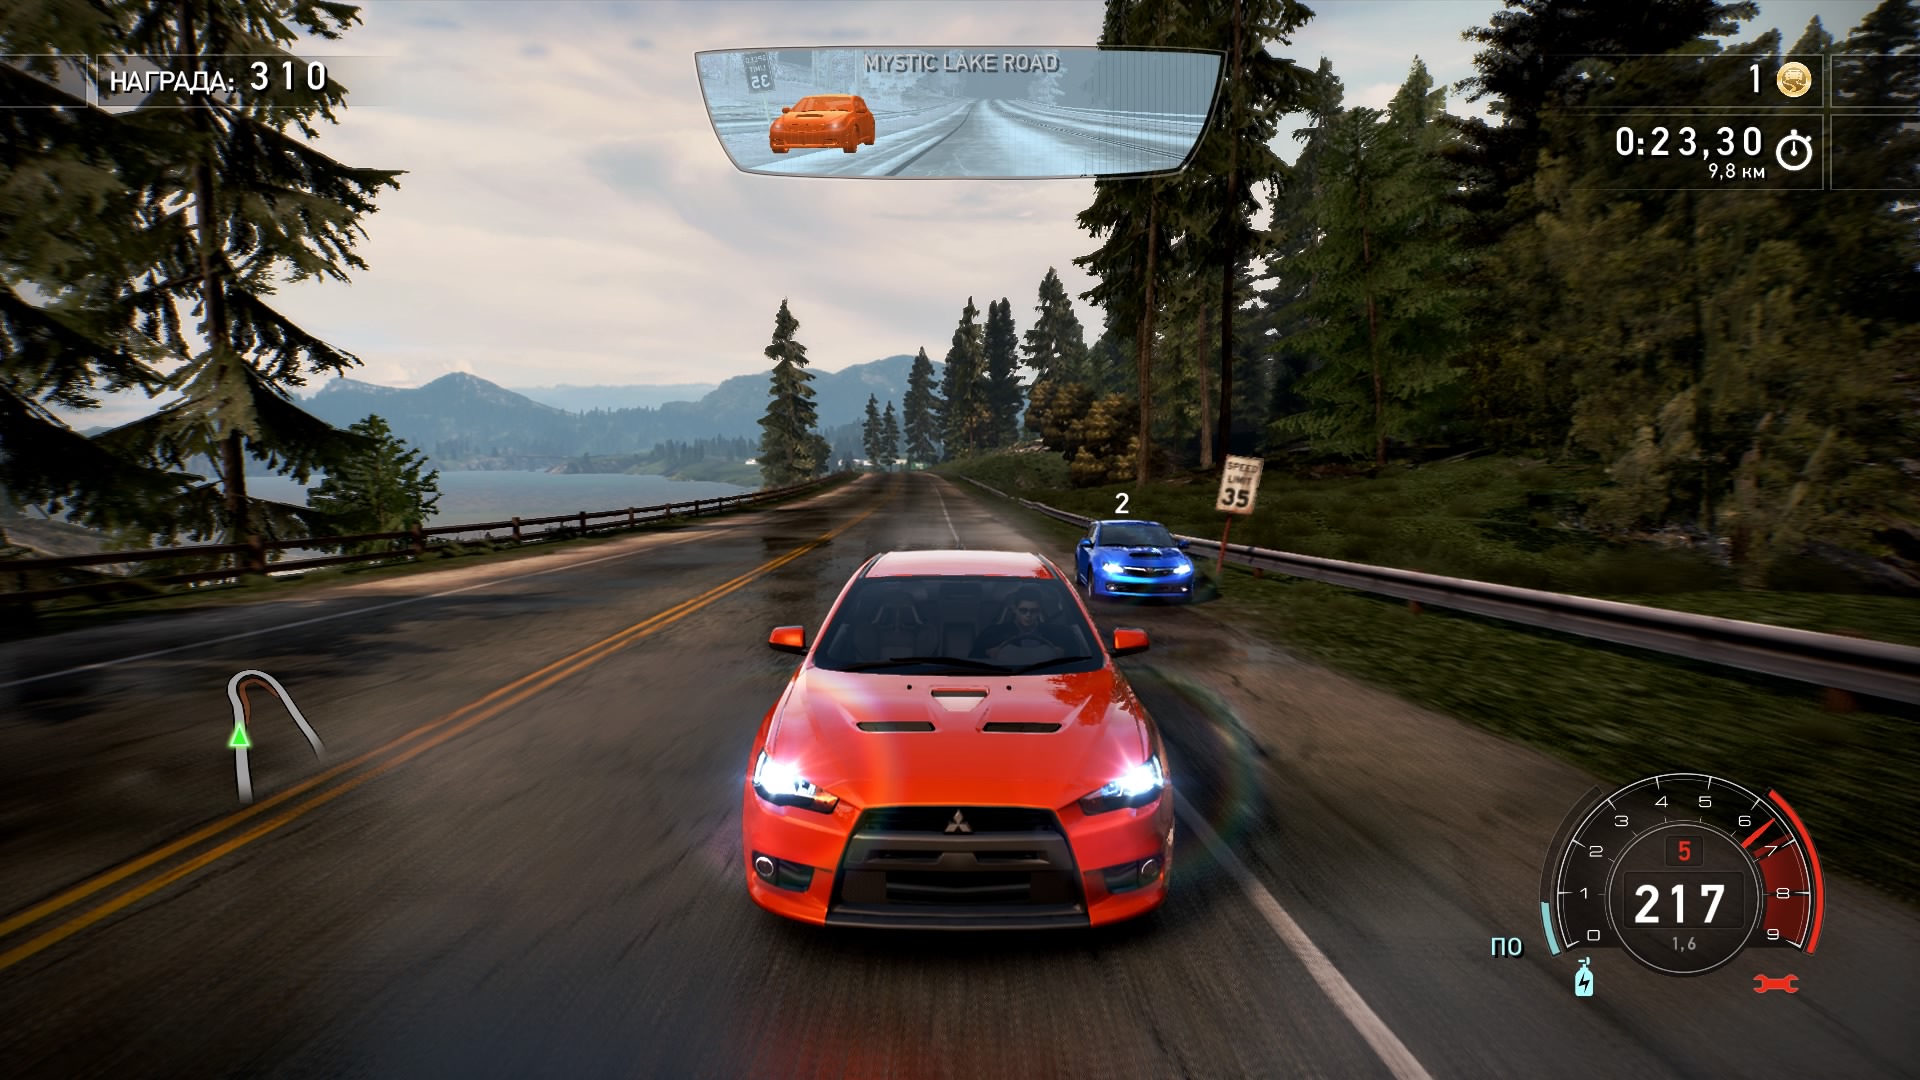 Hot pursuit nintendo. Need for Speed hot Pursuit Remastered. Need for Speed hot Pursuit ps4. Need for Speed hot Pursuit ремастер. NFS hot Pursuit ps4.